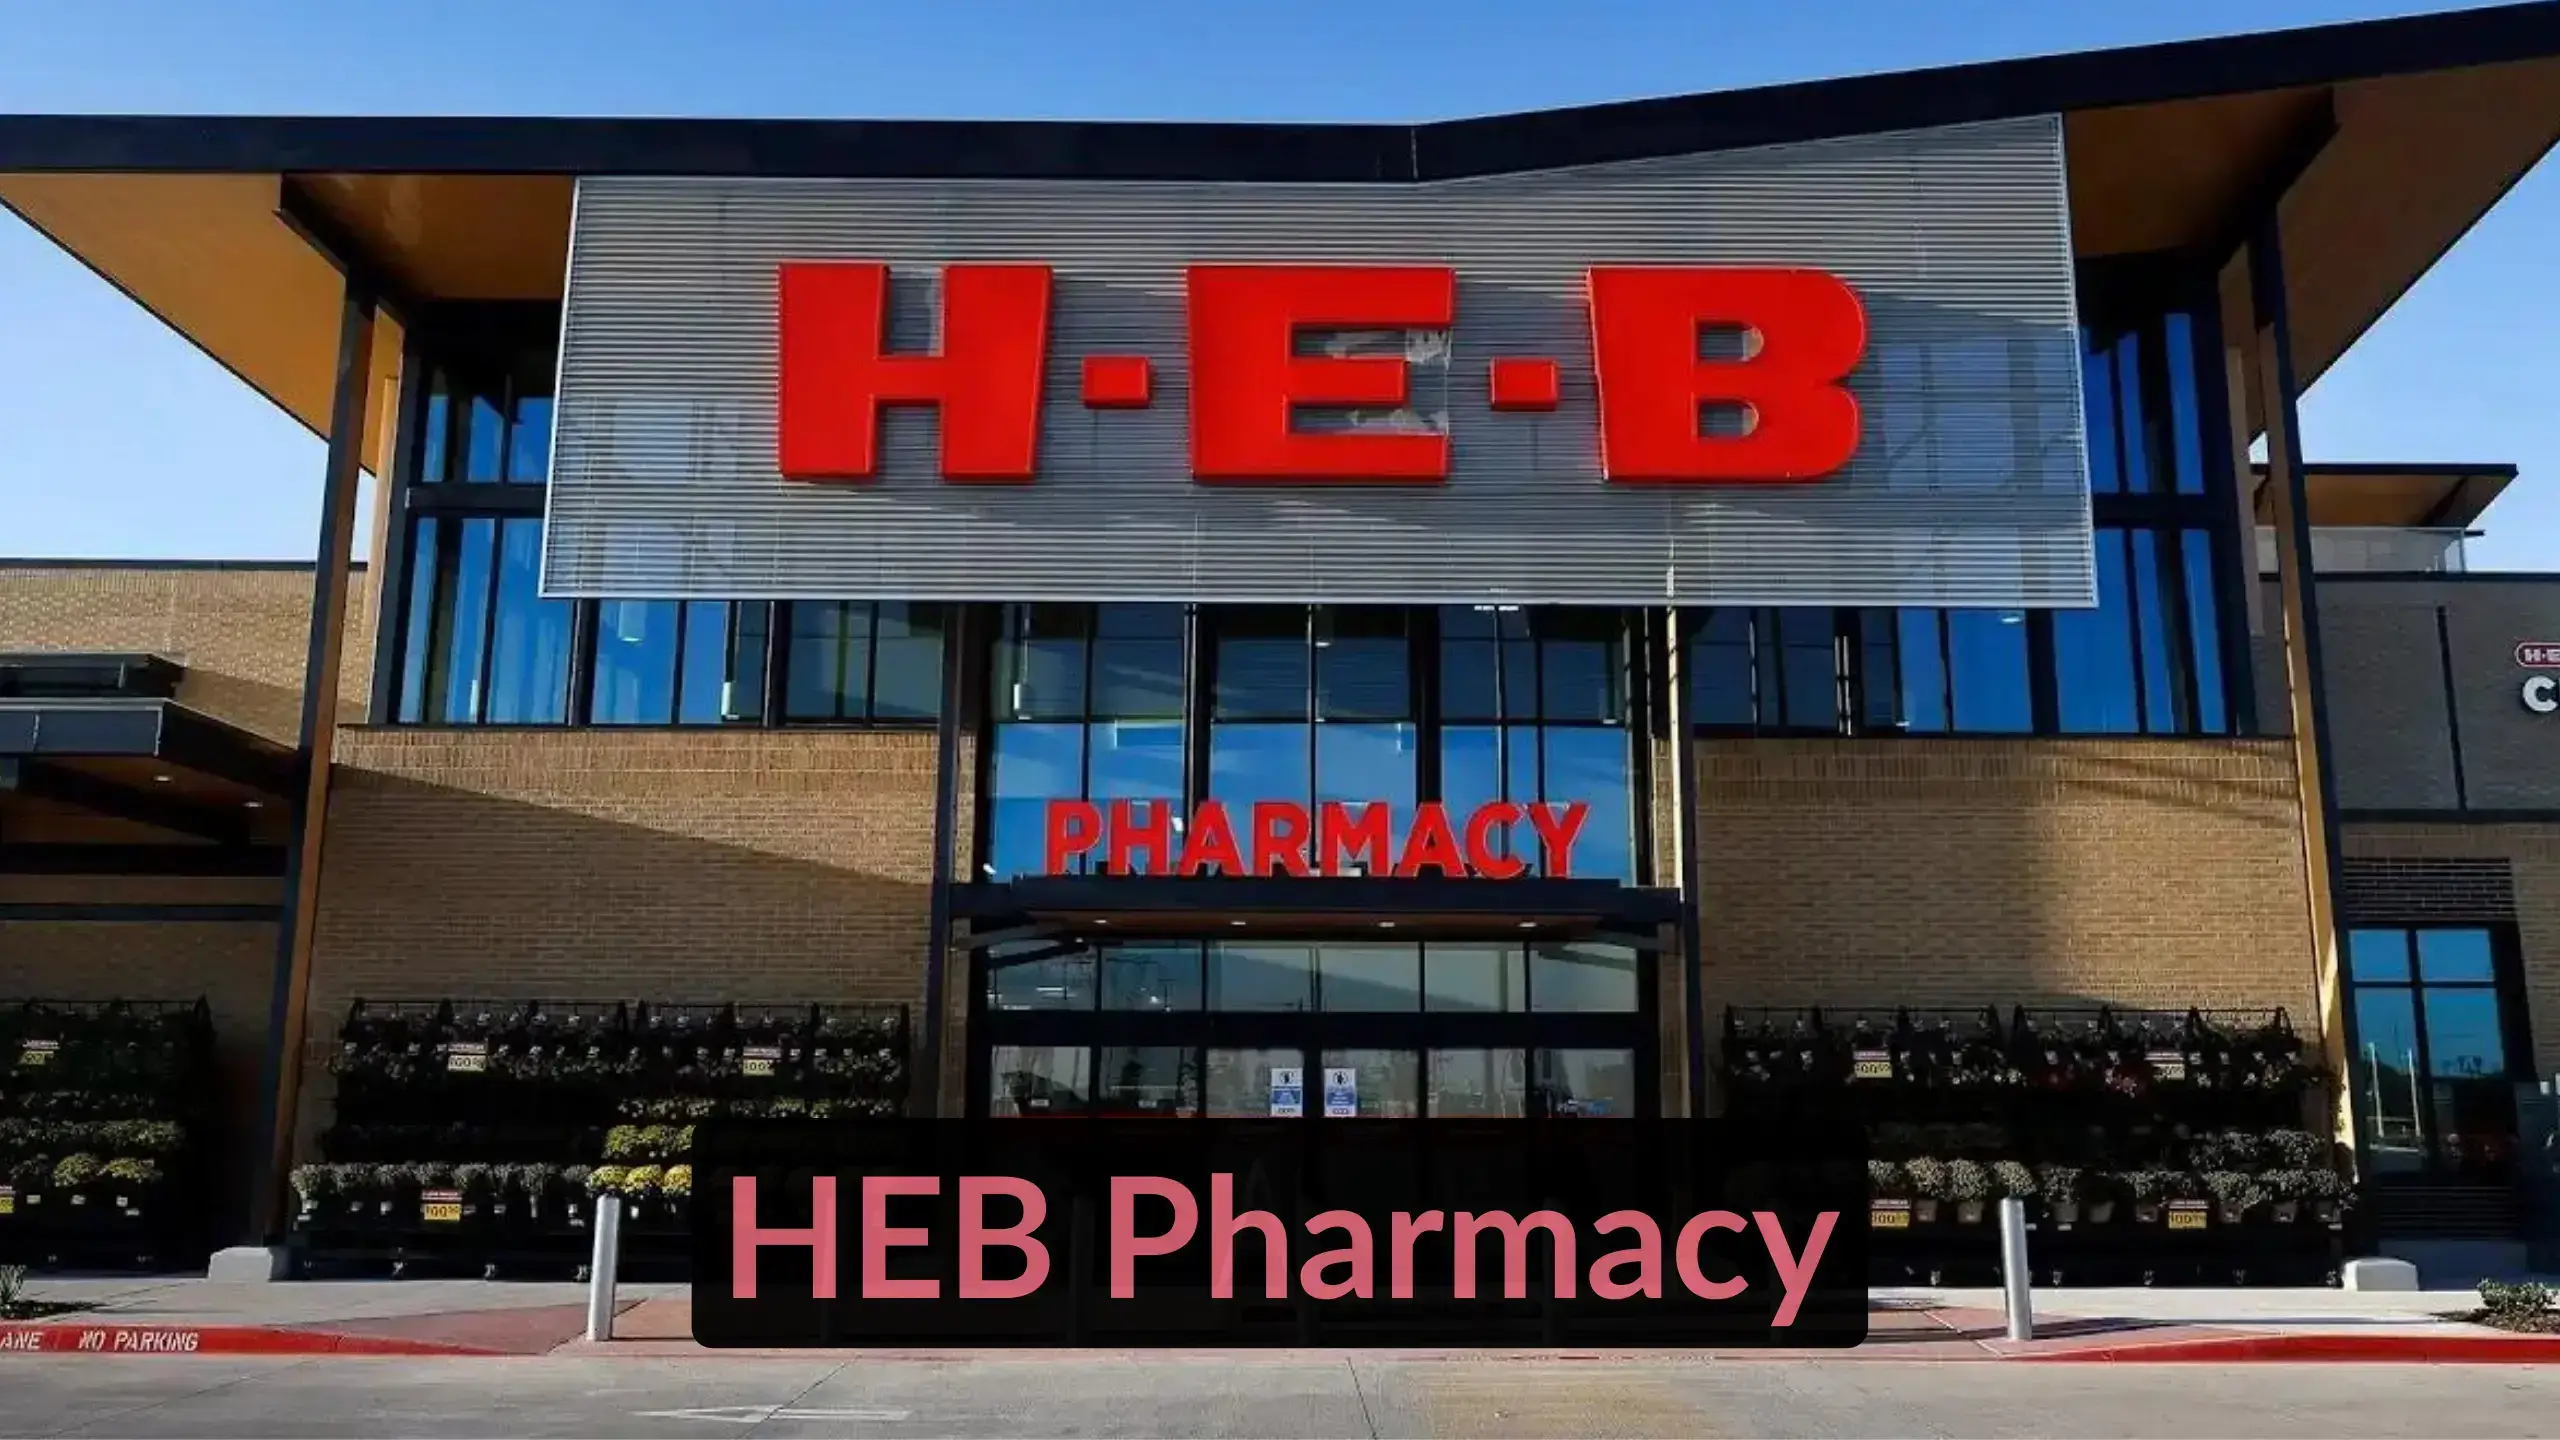 A Quick Guide to Heb Pharmacy Hours| And Also Find Heb Pharmacy Near Me Locations. |What Time Does Open - Close ? - Store-Hour.com